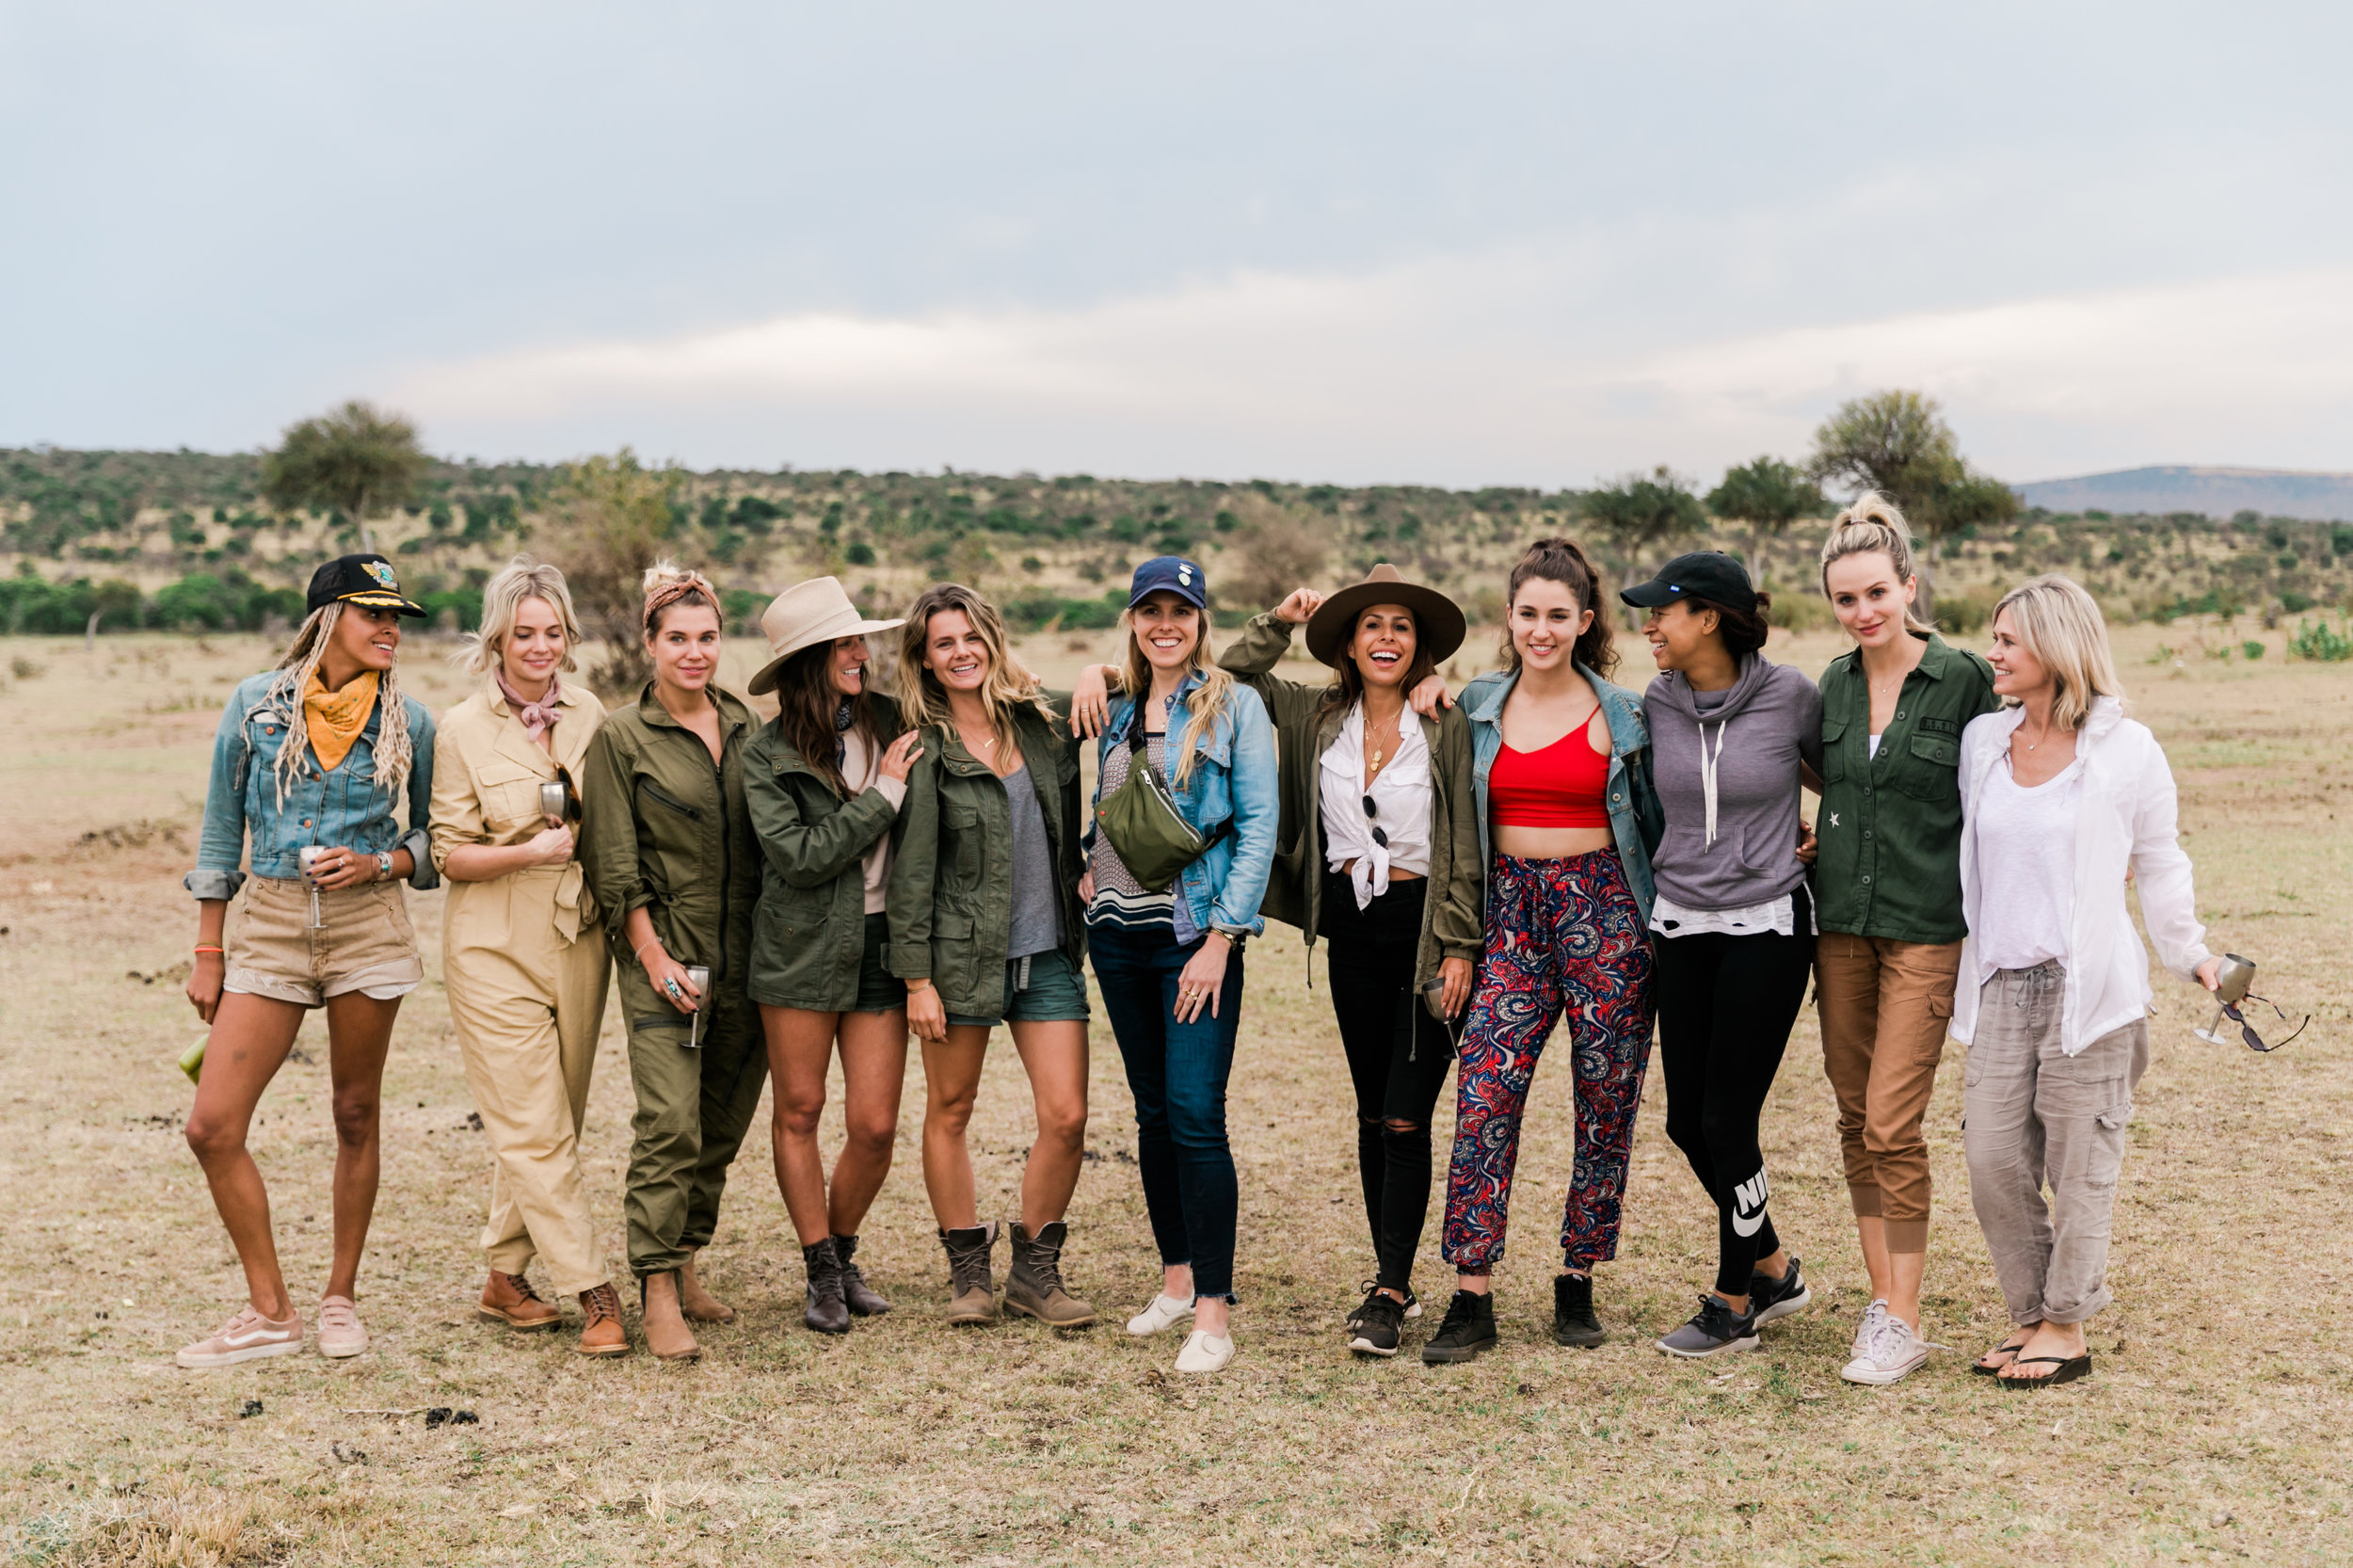 Safari Packing List: What To Pack & Wear on Safari in Africa